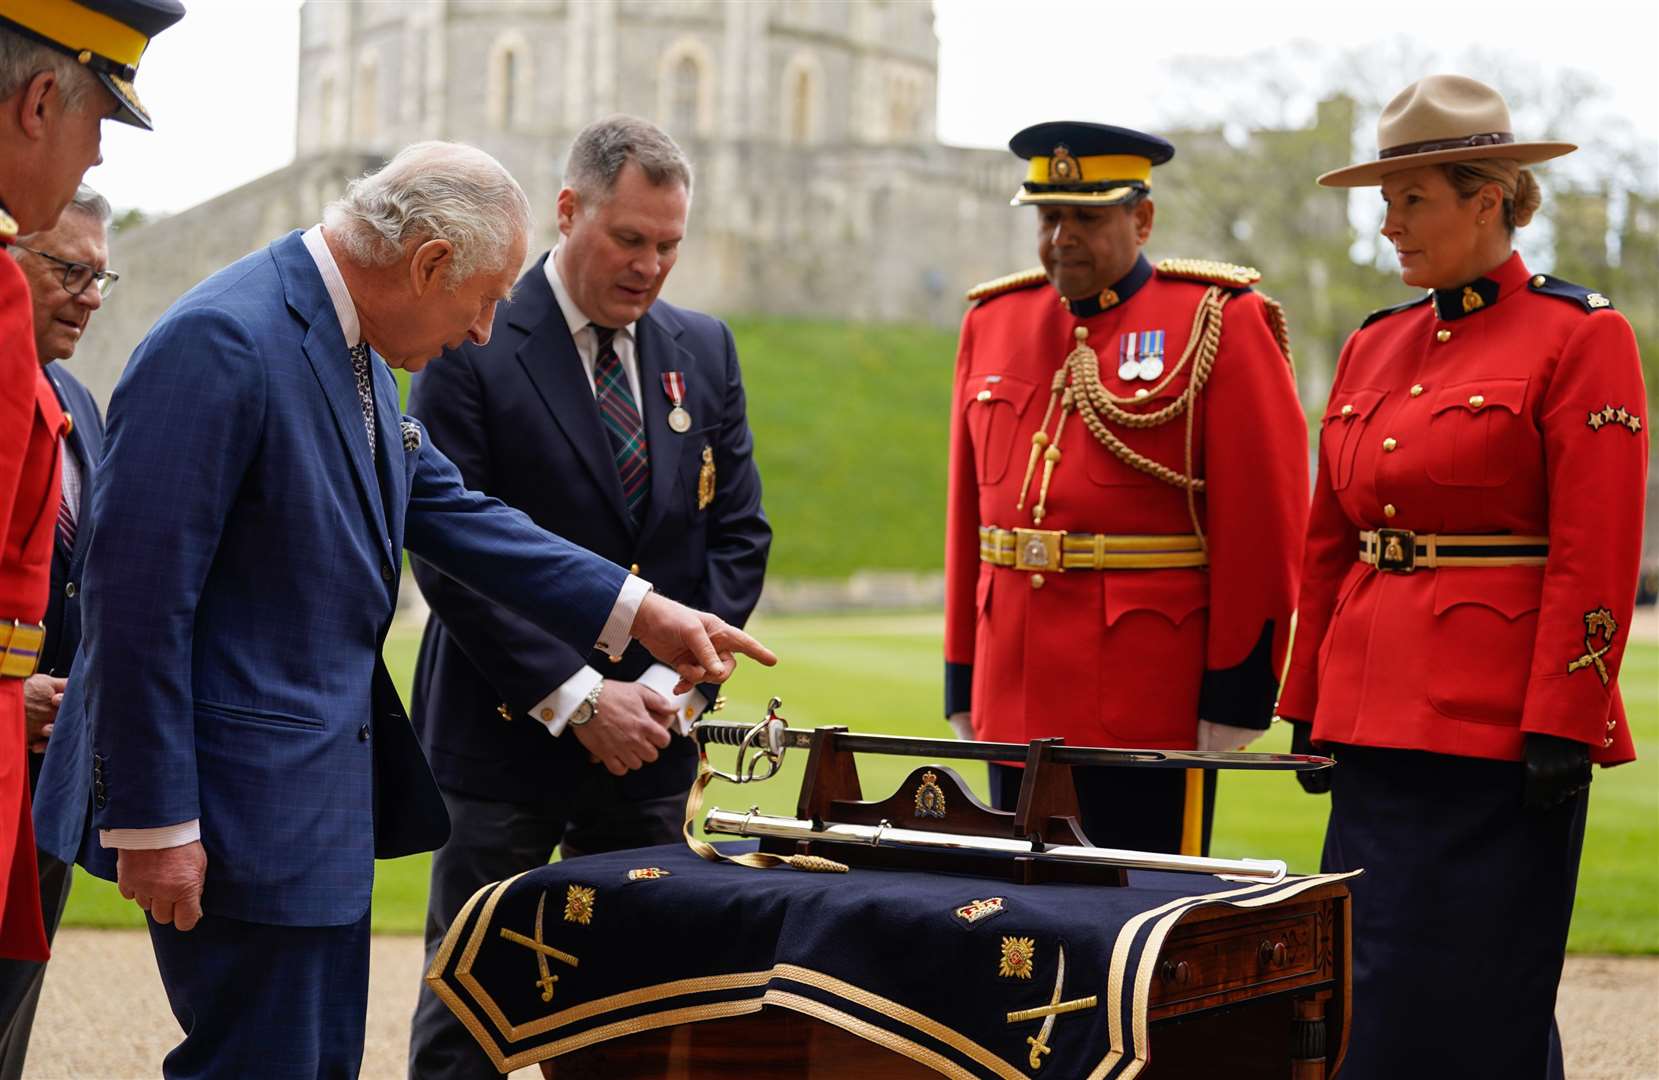 Charles III is presented with the sword (Andrew Matthews/PA)